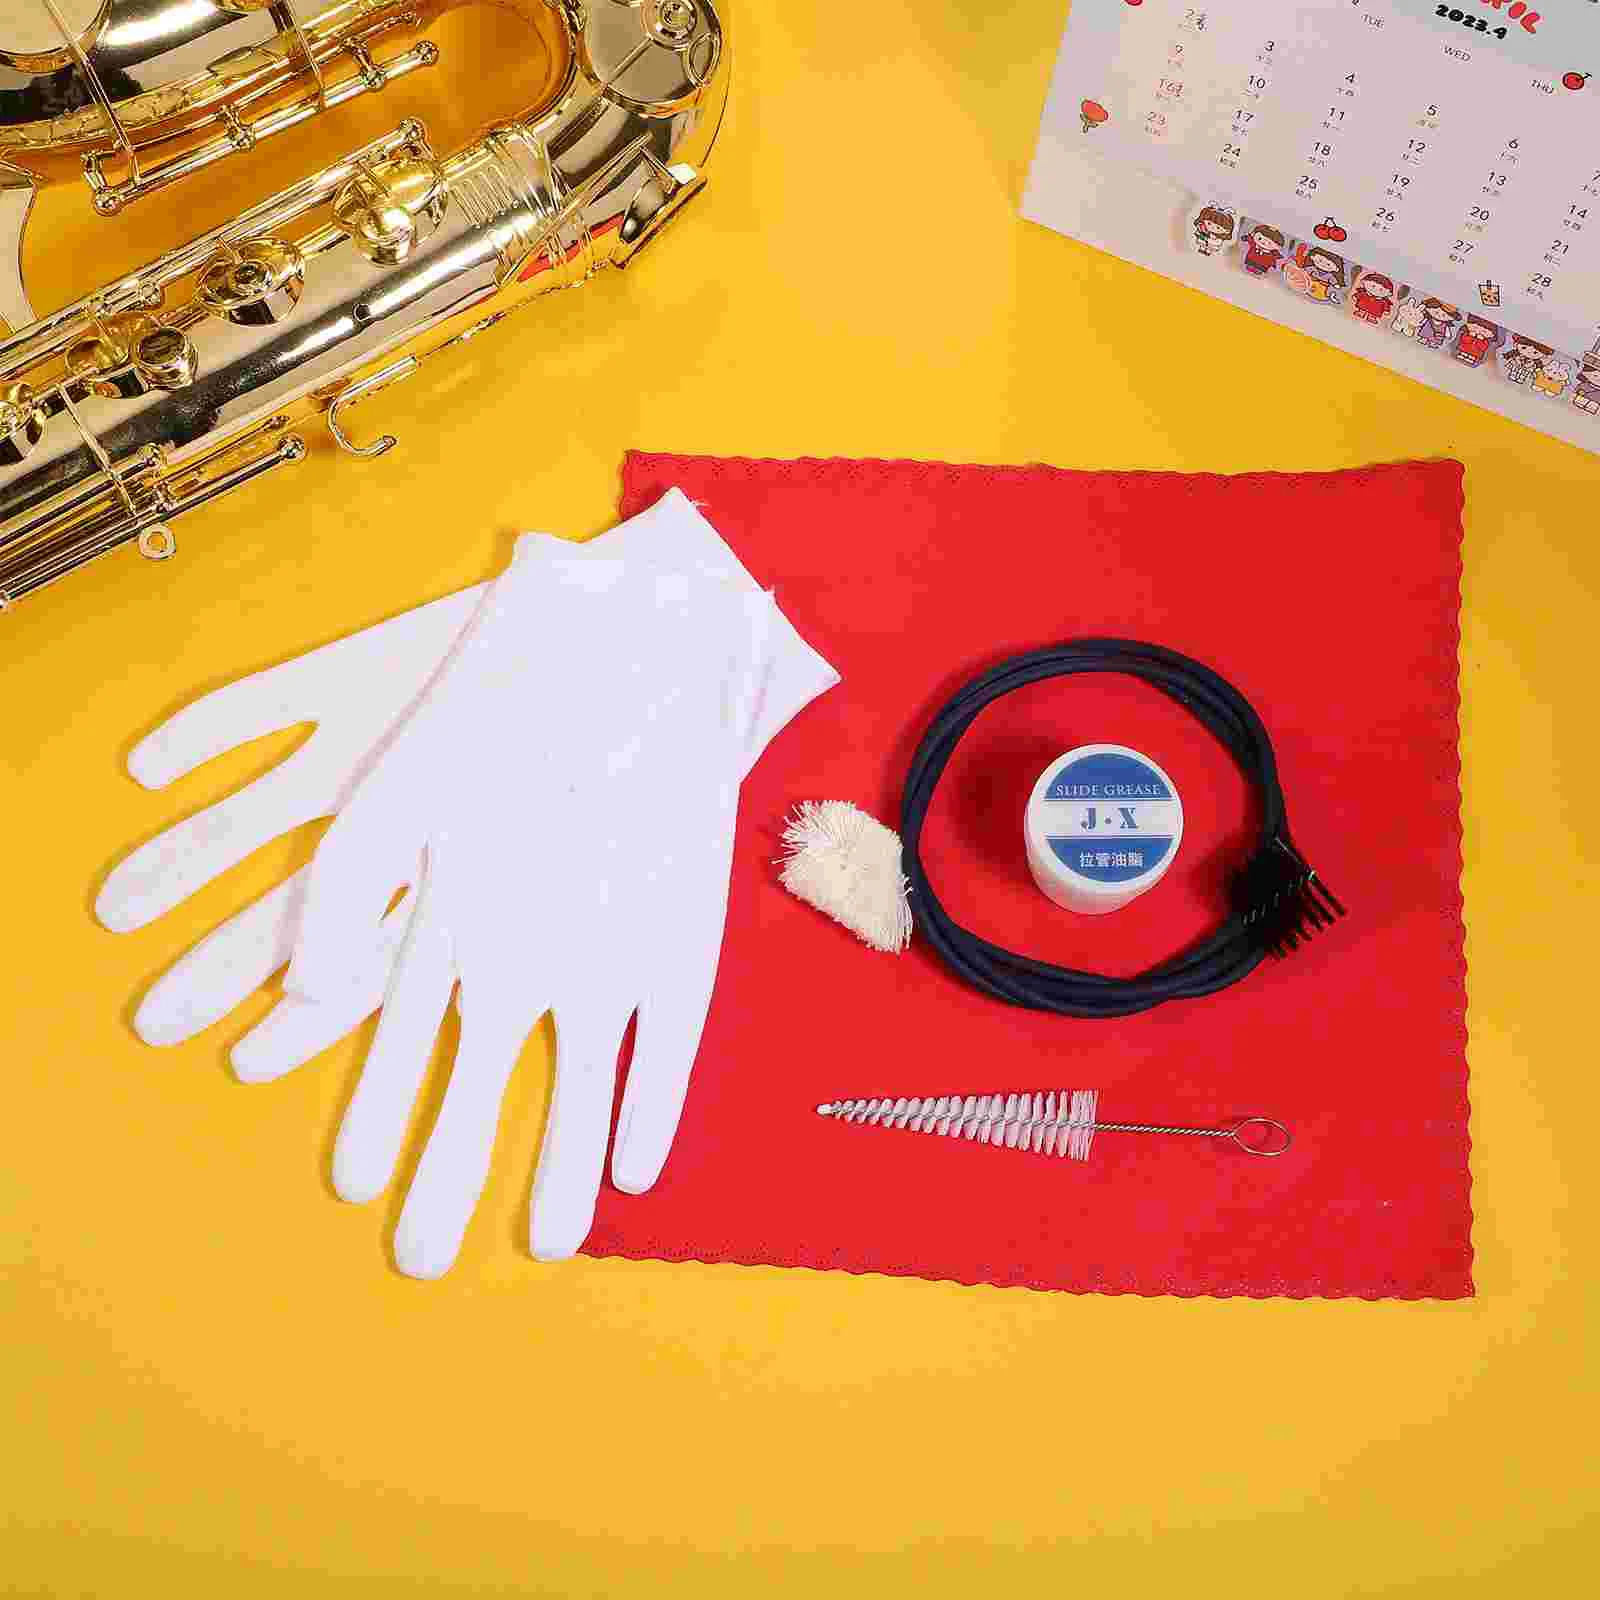 Trumpet Cleaning Care Kit Instrument Care Set Mouthpiece Brush Cornet Casing Clean Brush Cleaning Cloth and Gloves Cork Grease enlarge